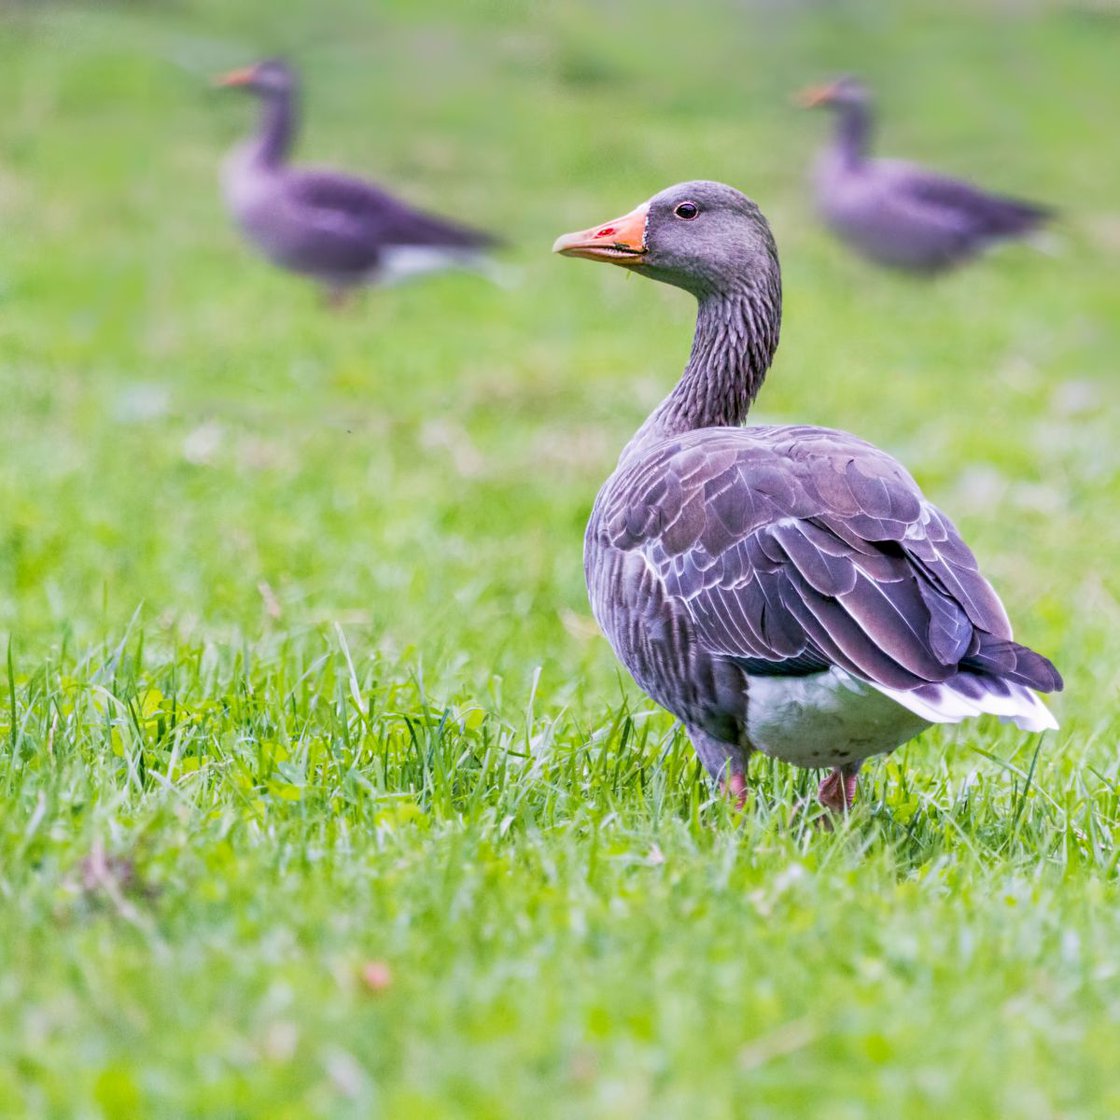 GOOSE definition and meaning